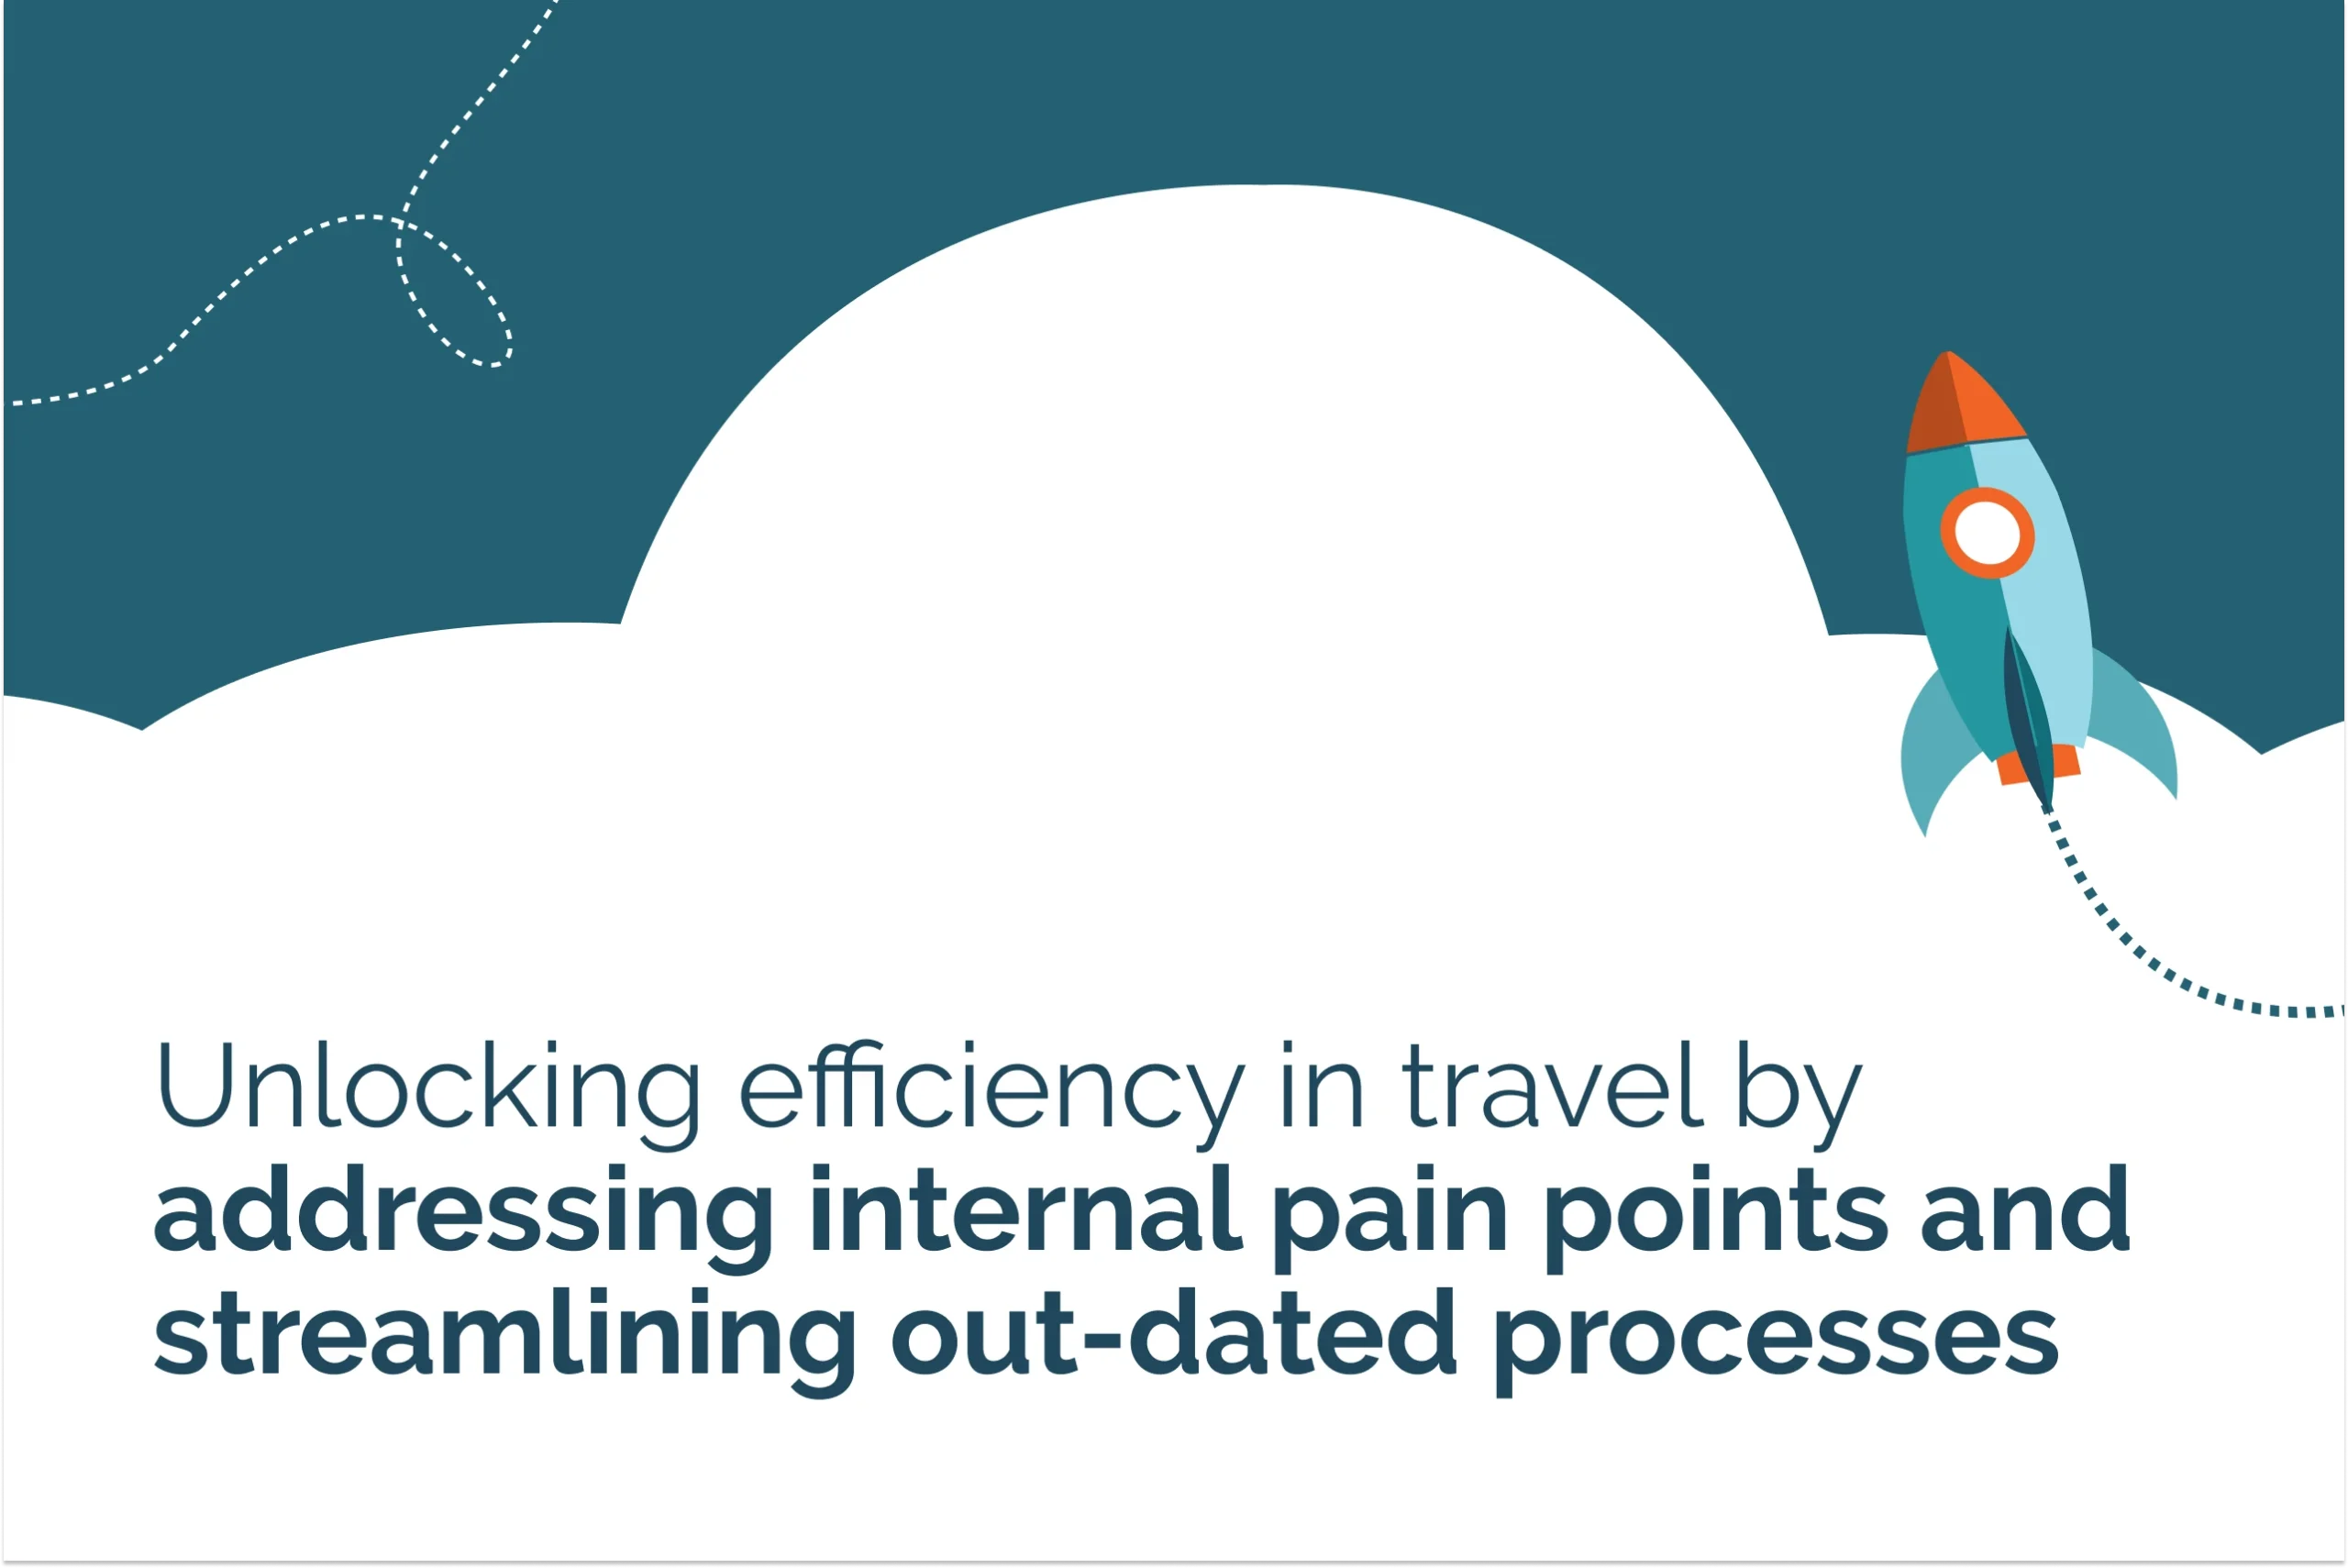 Unlocking efficiency in travel by addressing internal pain points and streamlining out-dated processes